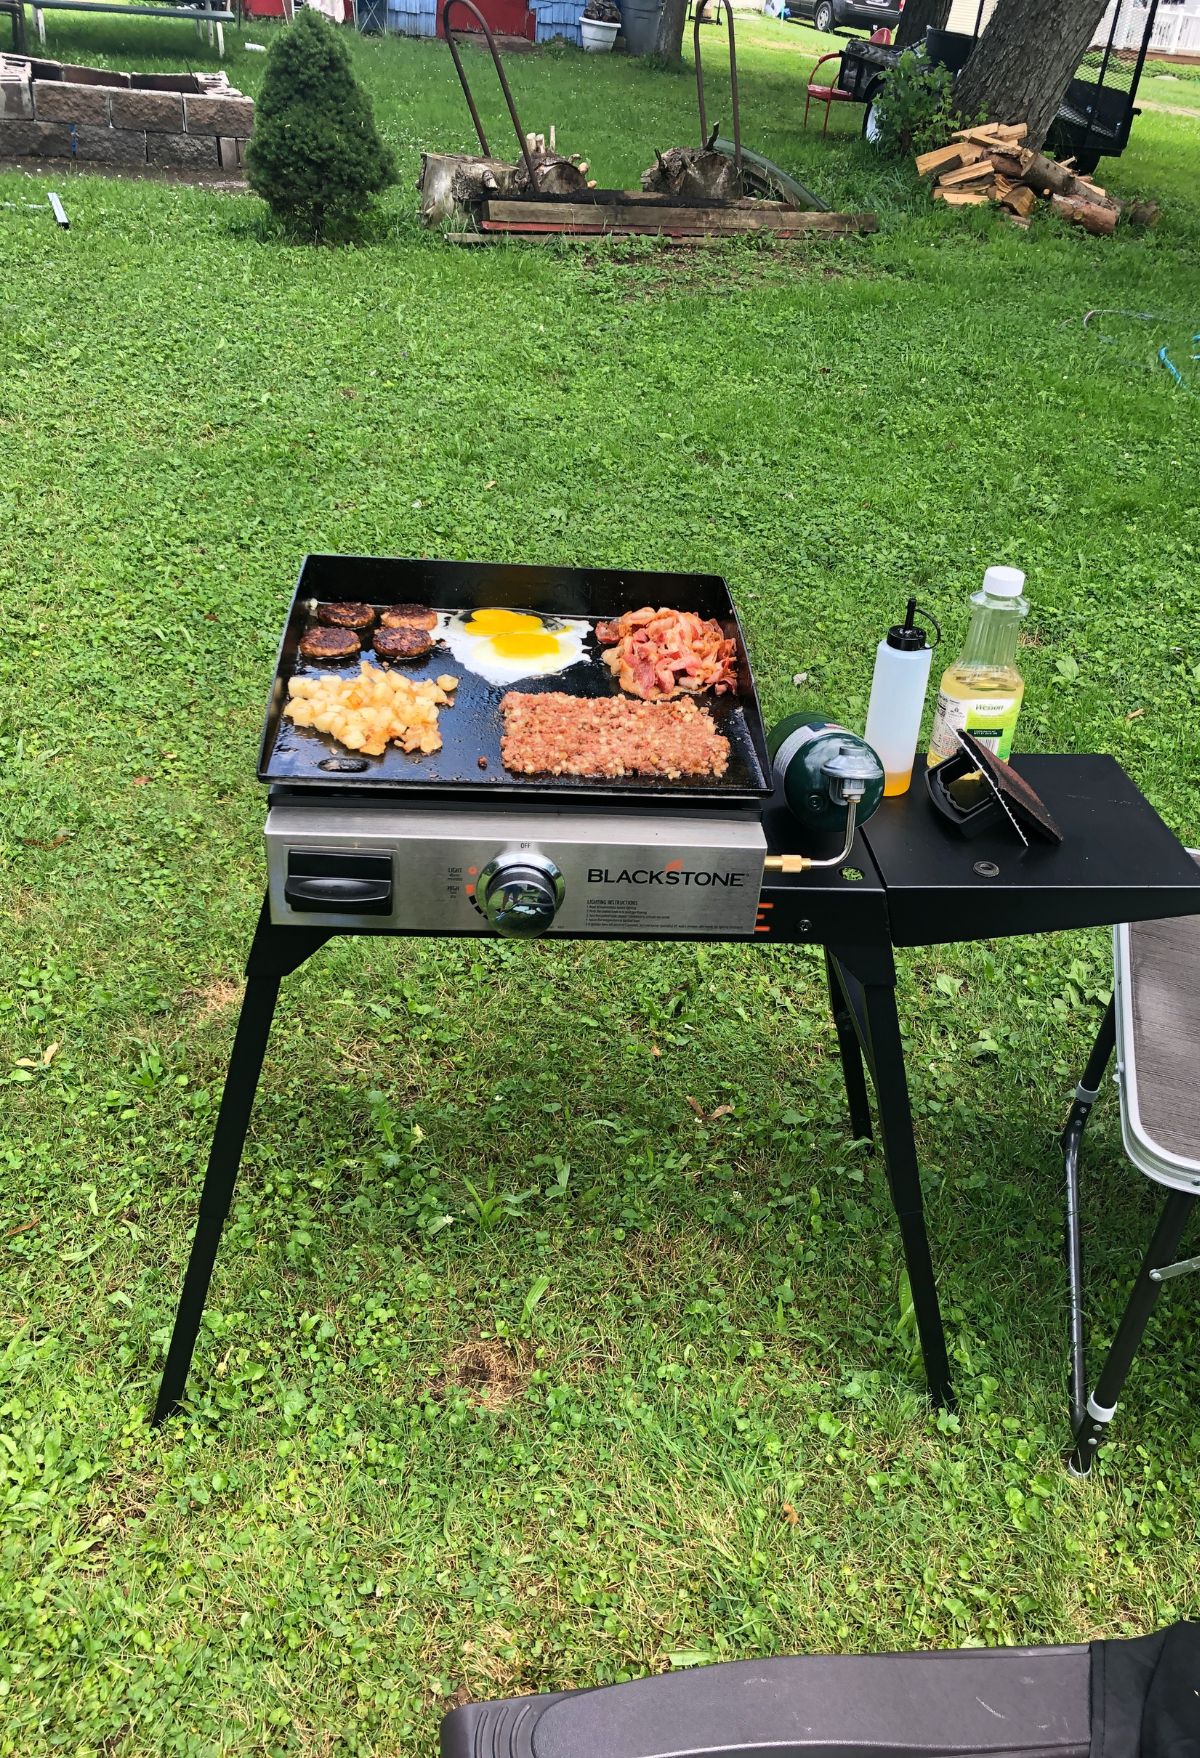 A blackstone grill in the grass with cooking food on it.